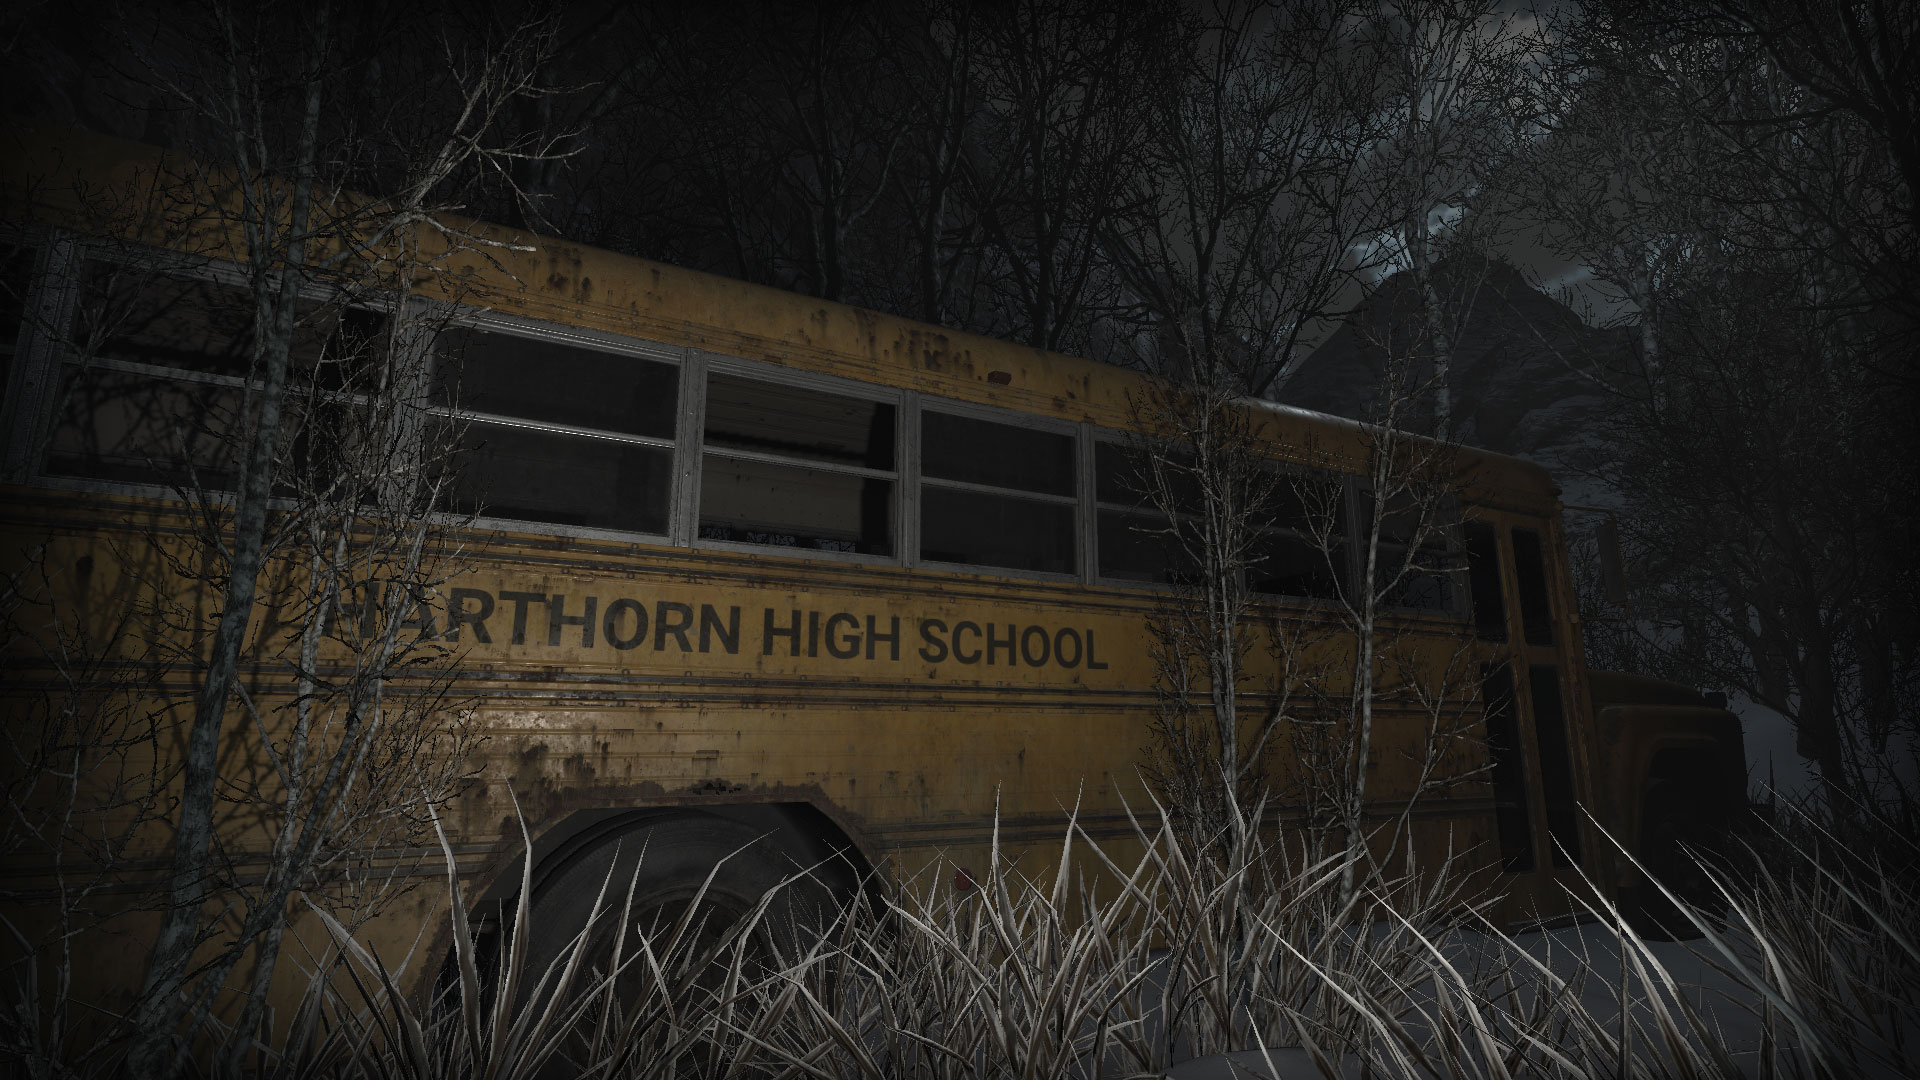 An abandoned school bus in the snow outside Harthorn High School